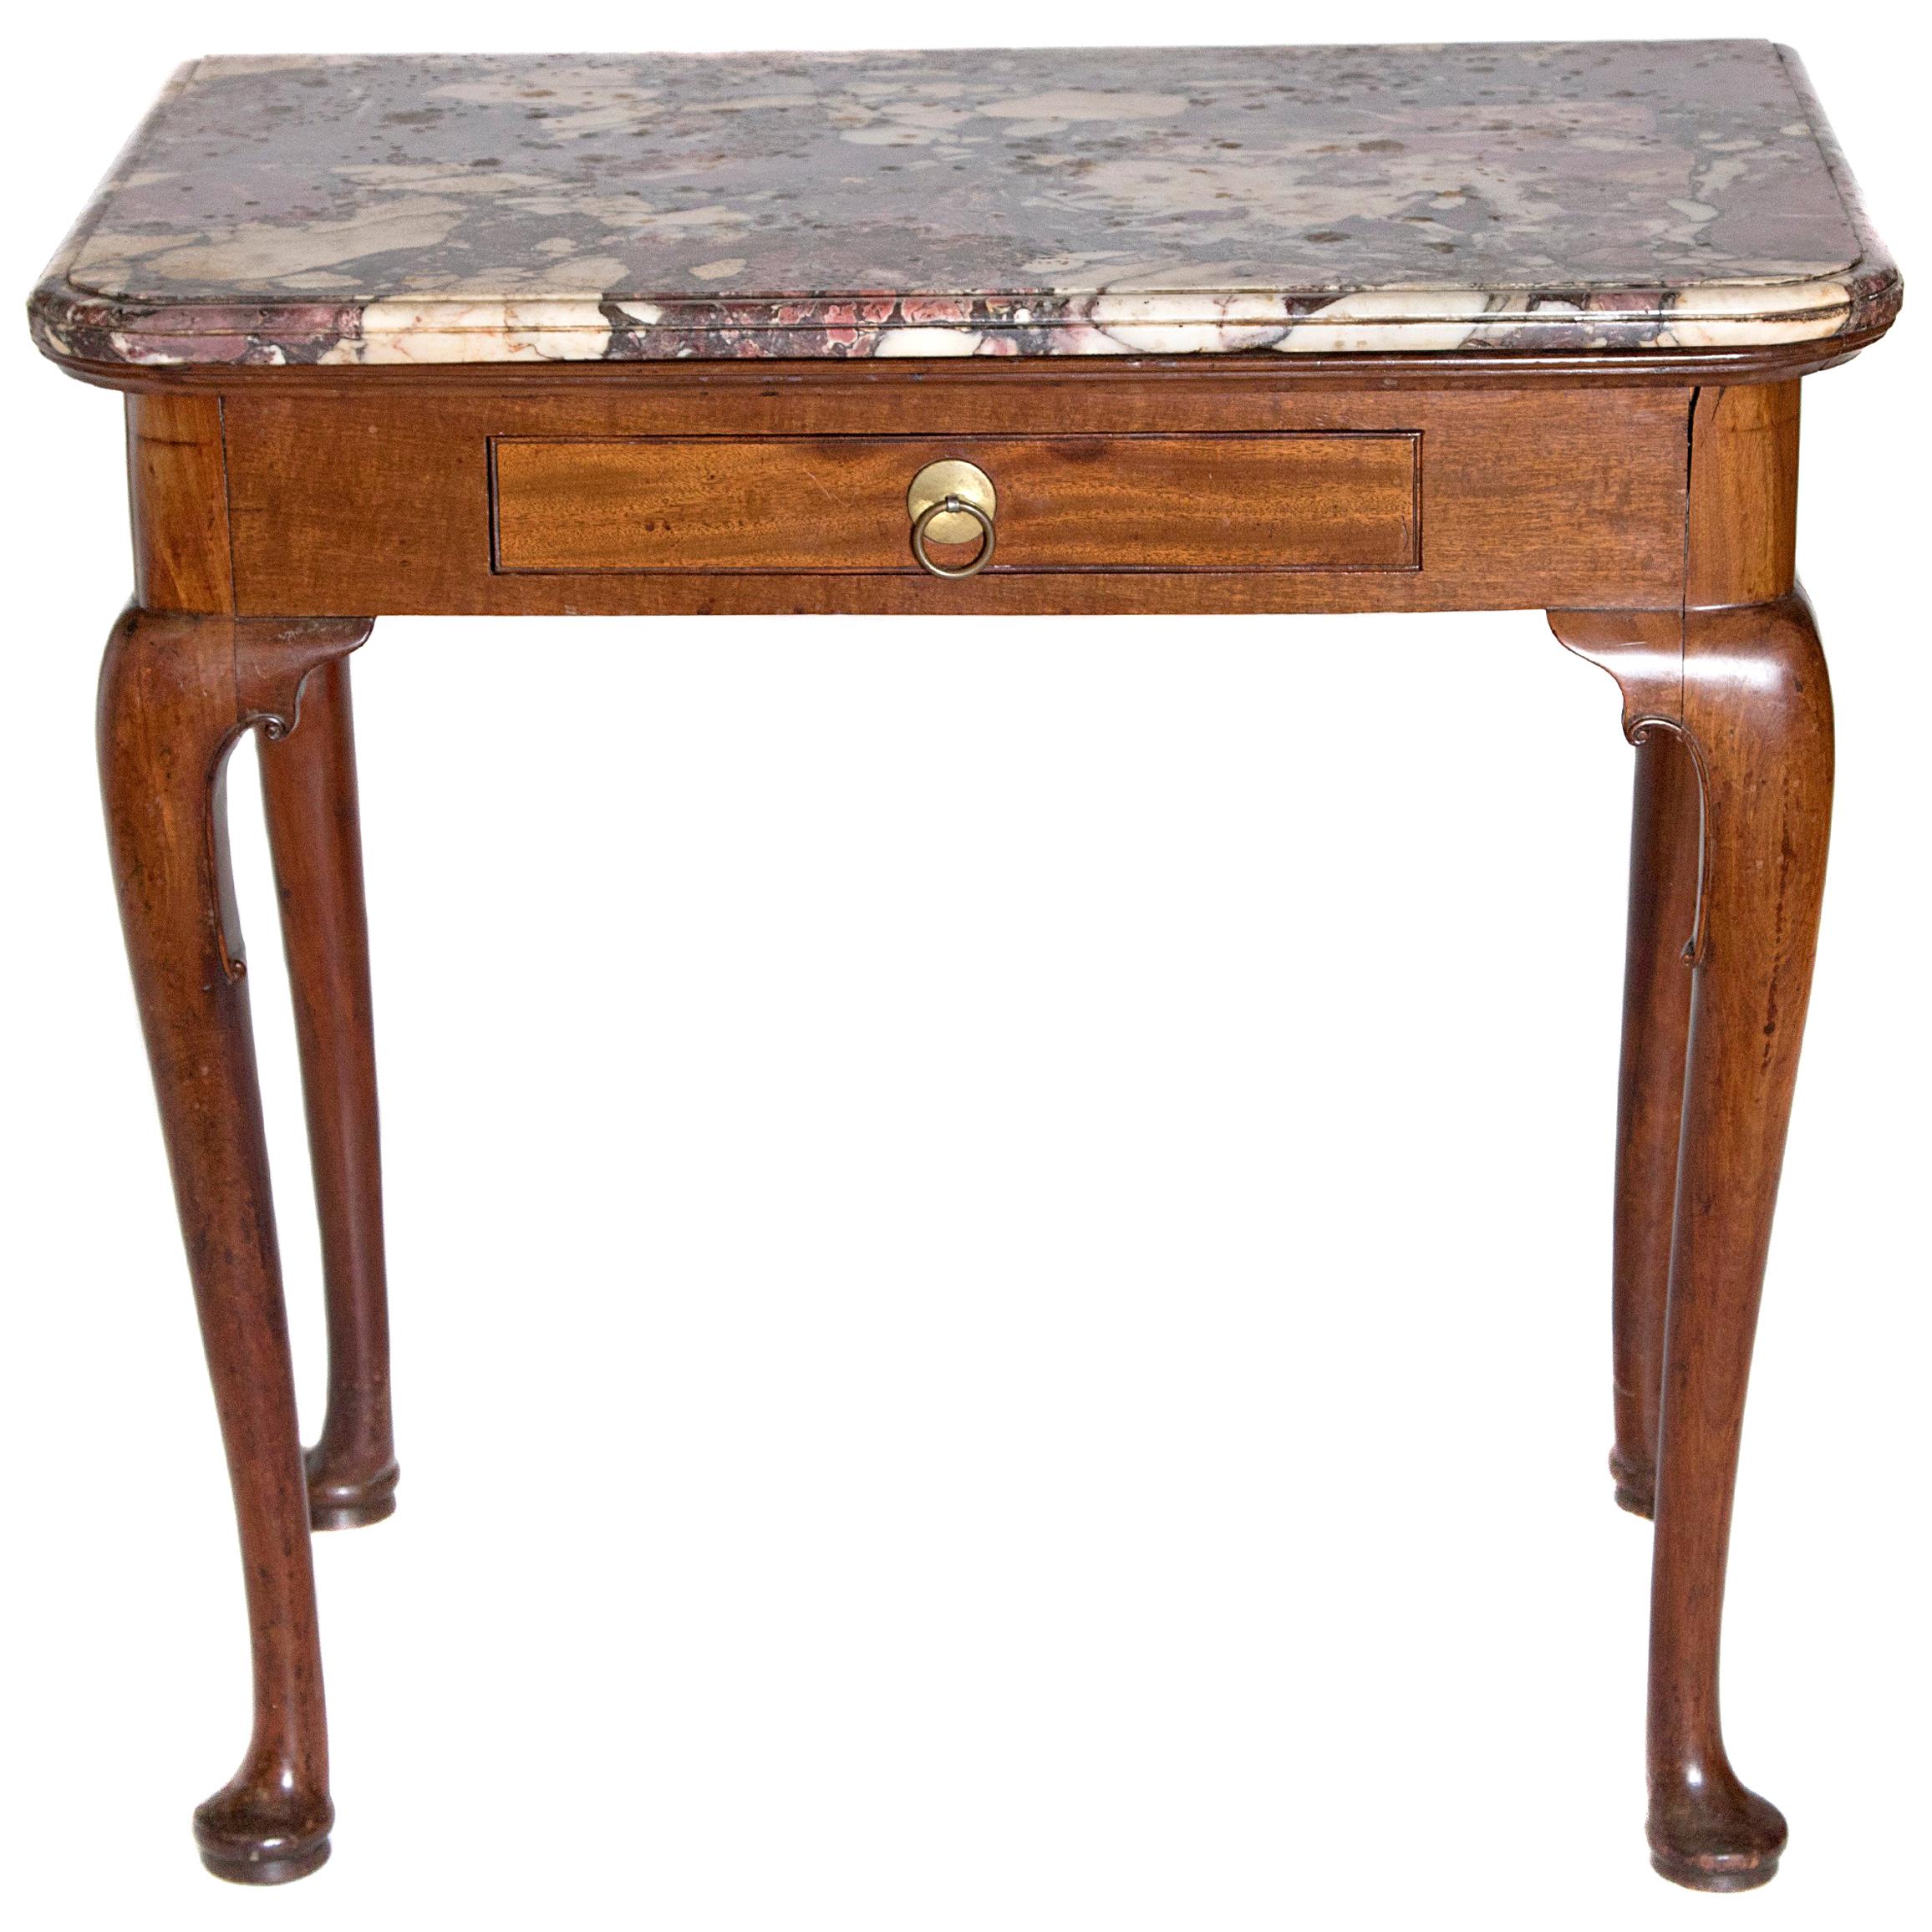 Early 18th Century Queen Anne Mahogany Side Table